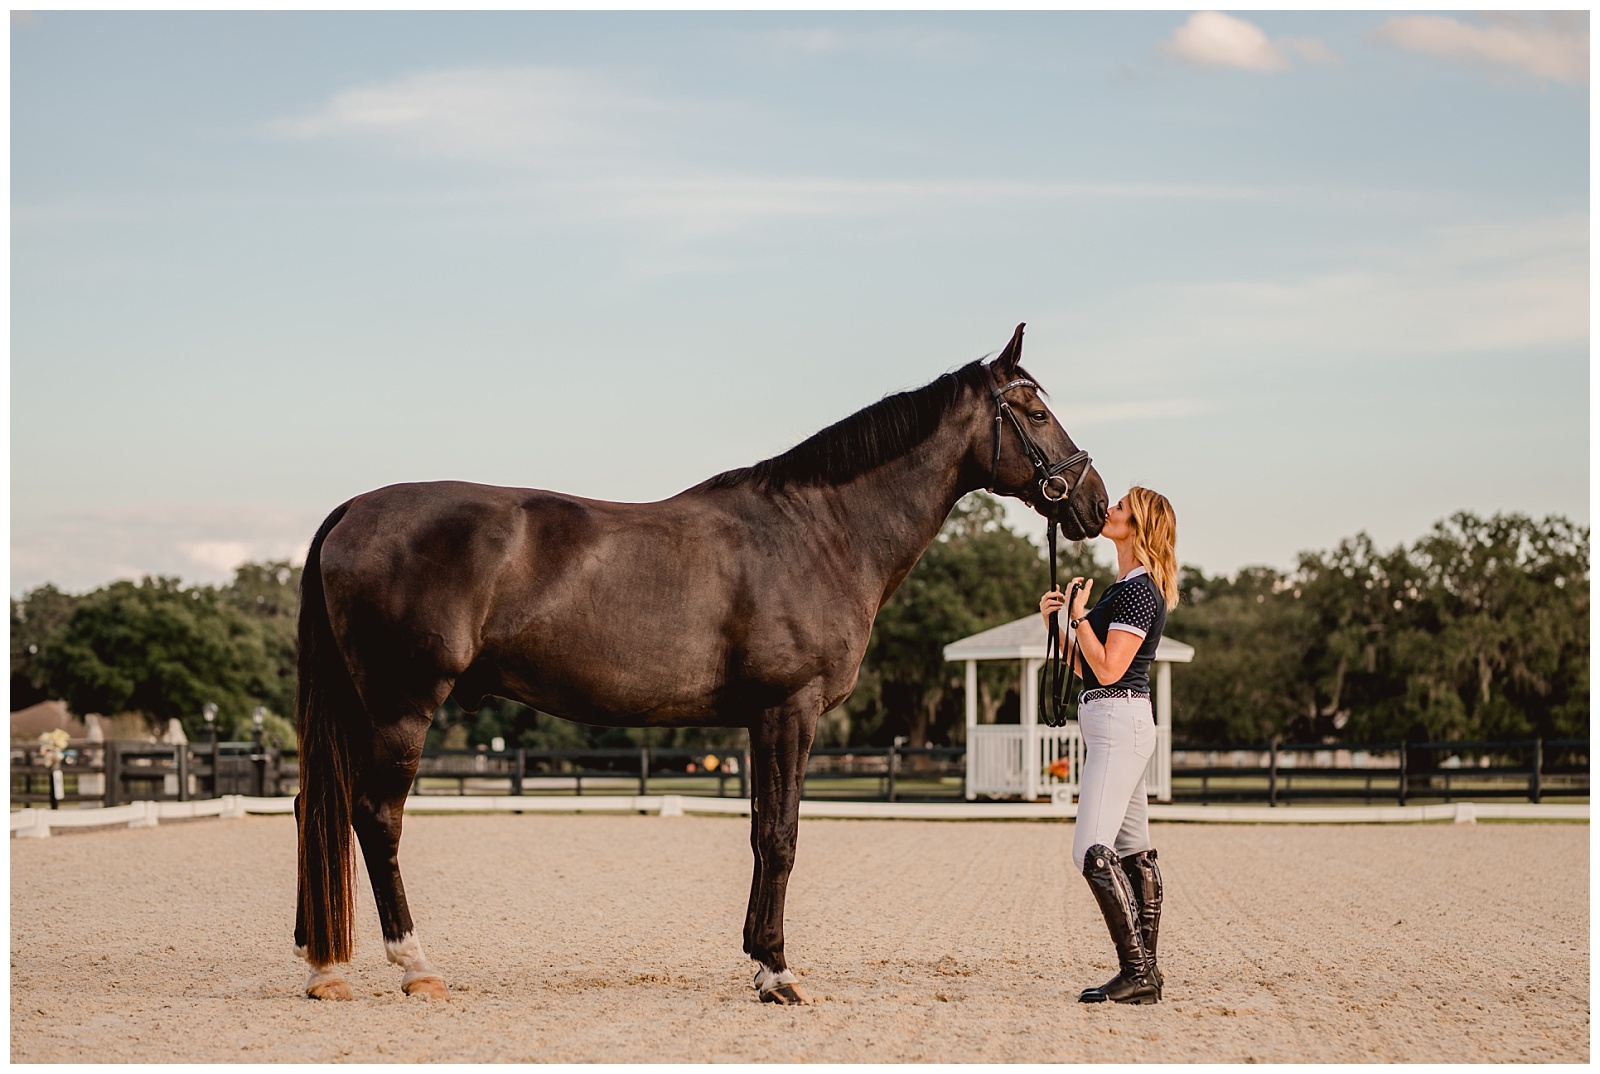 Ocala dressage rider photographer specializing in horse and rider portraits. Shelly Williams Photography